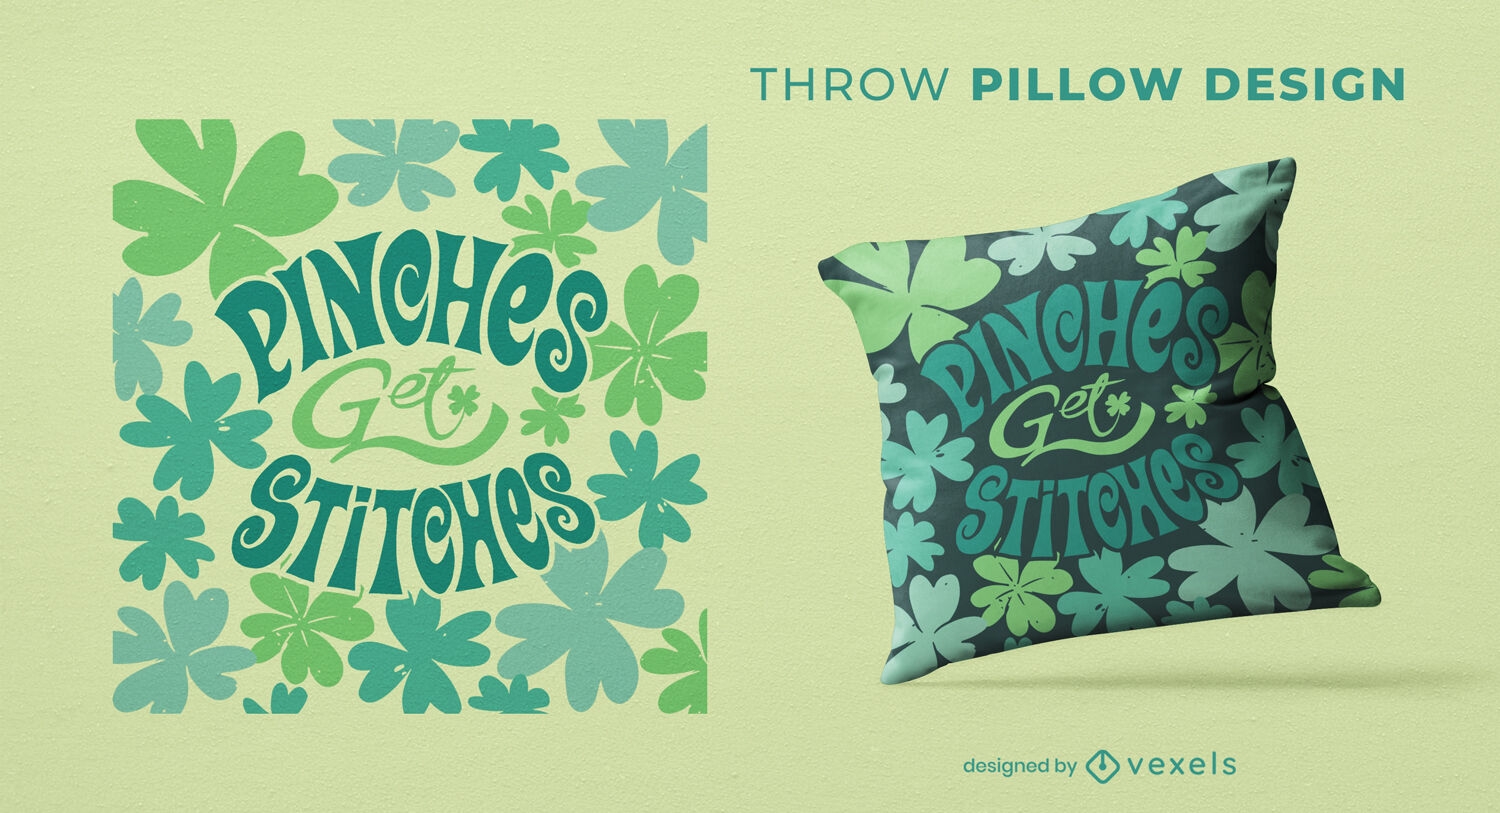 St Patrick's Day quote throw pillow design